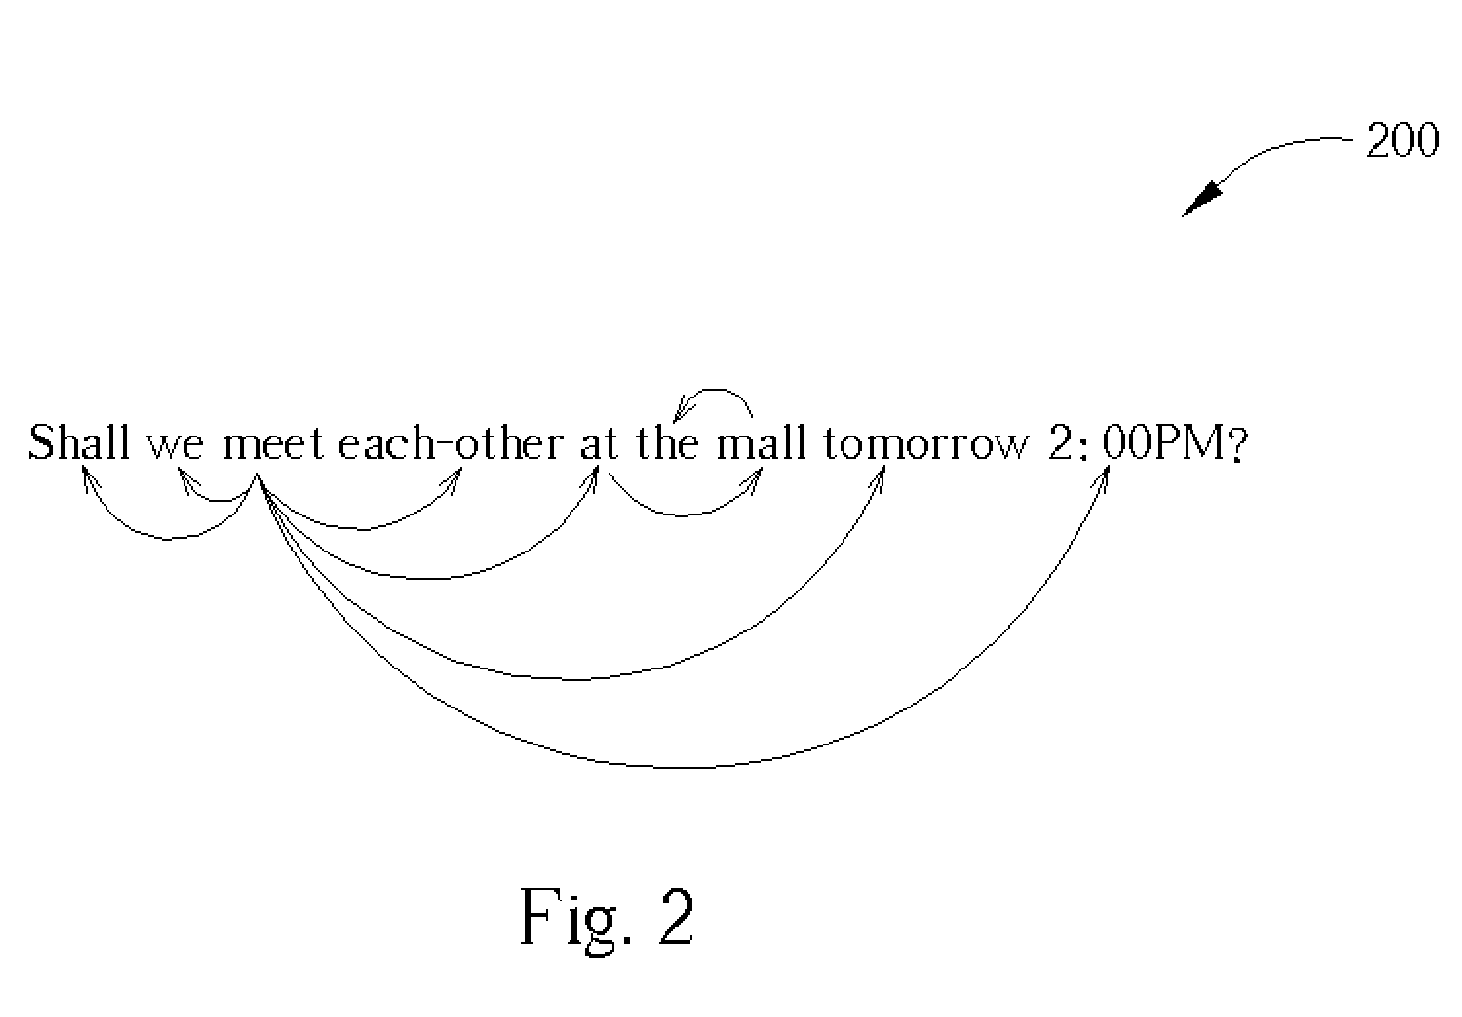 Method and apparatus for computerized extracting of scheduling information from a natural language e-mail